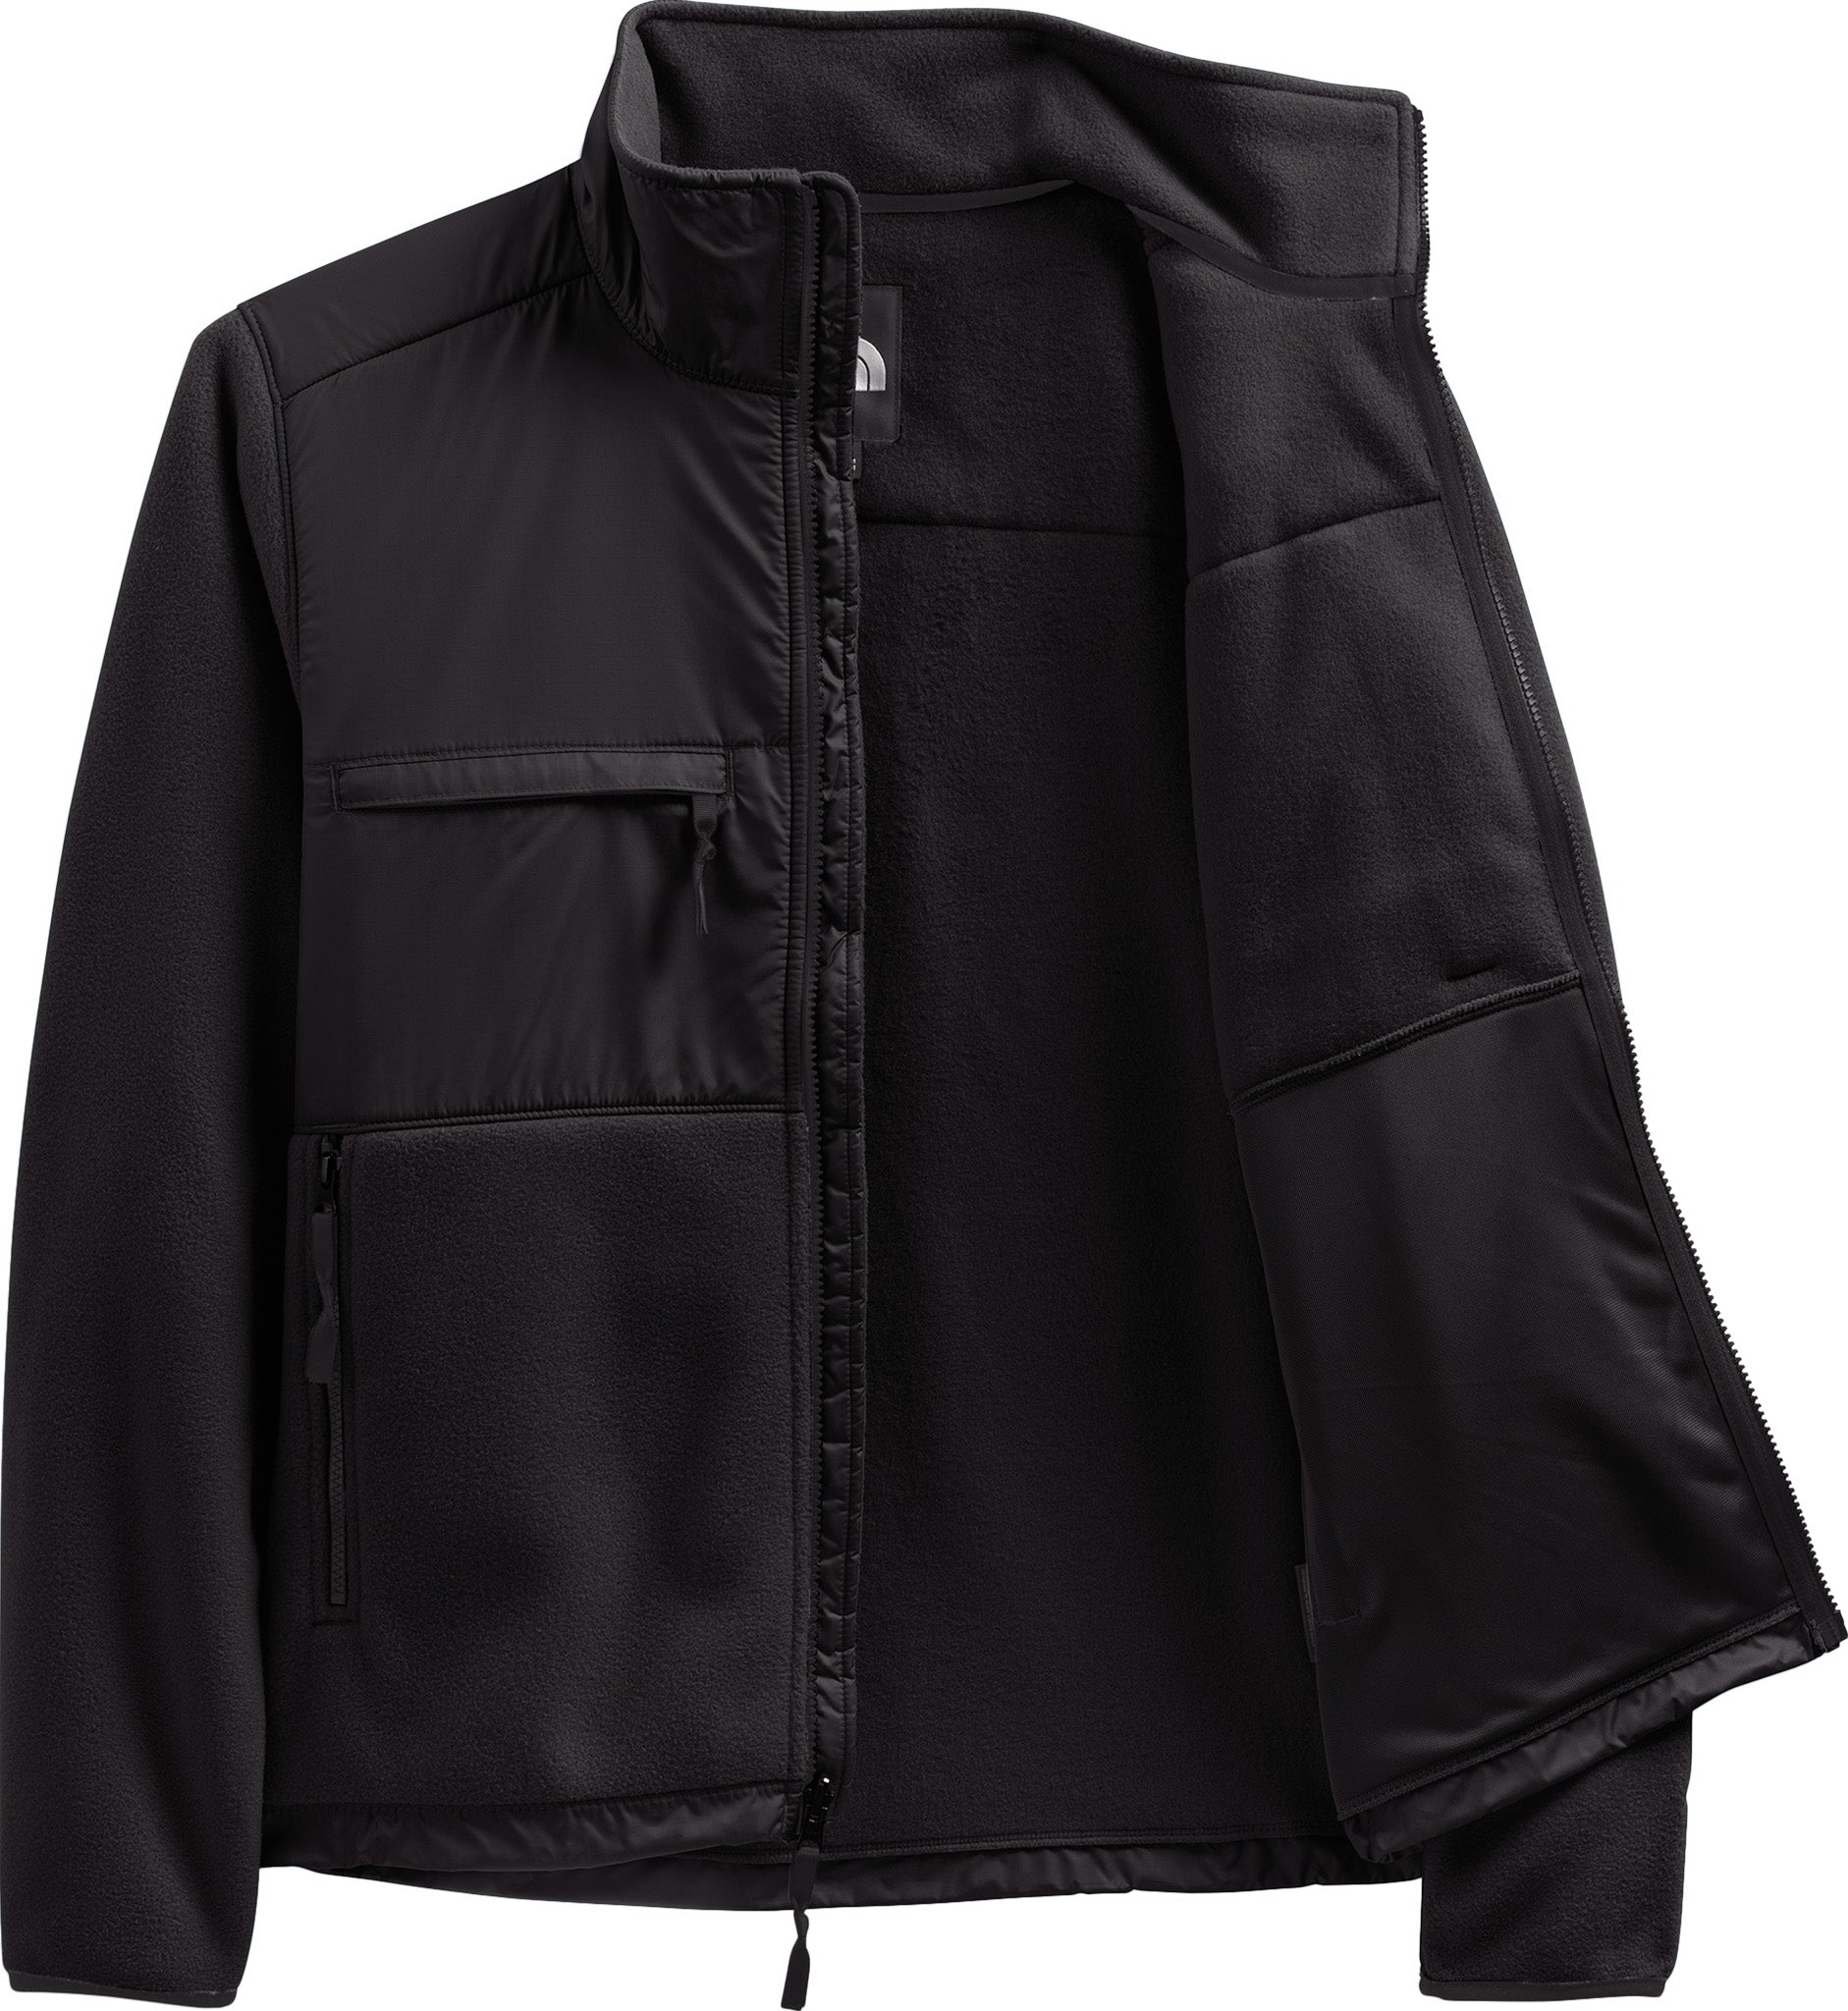 THE NORTH FACE Men's Denali Hoodie Jacket - Eastern Mountain Sports